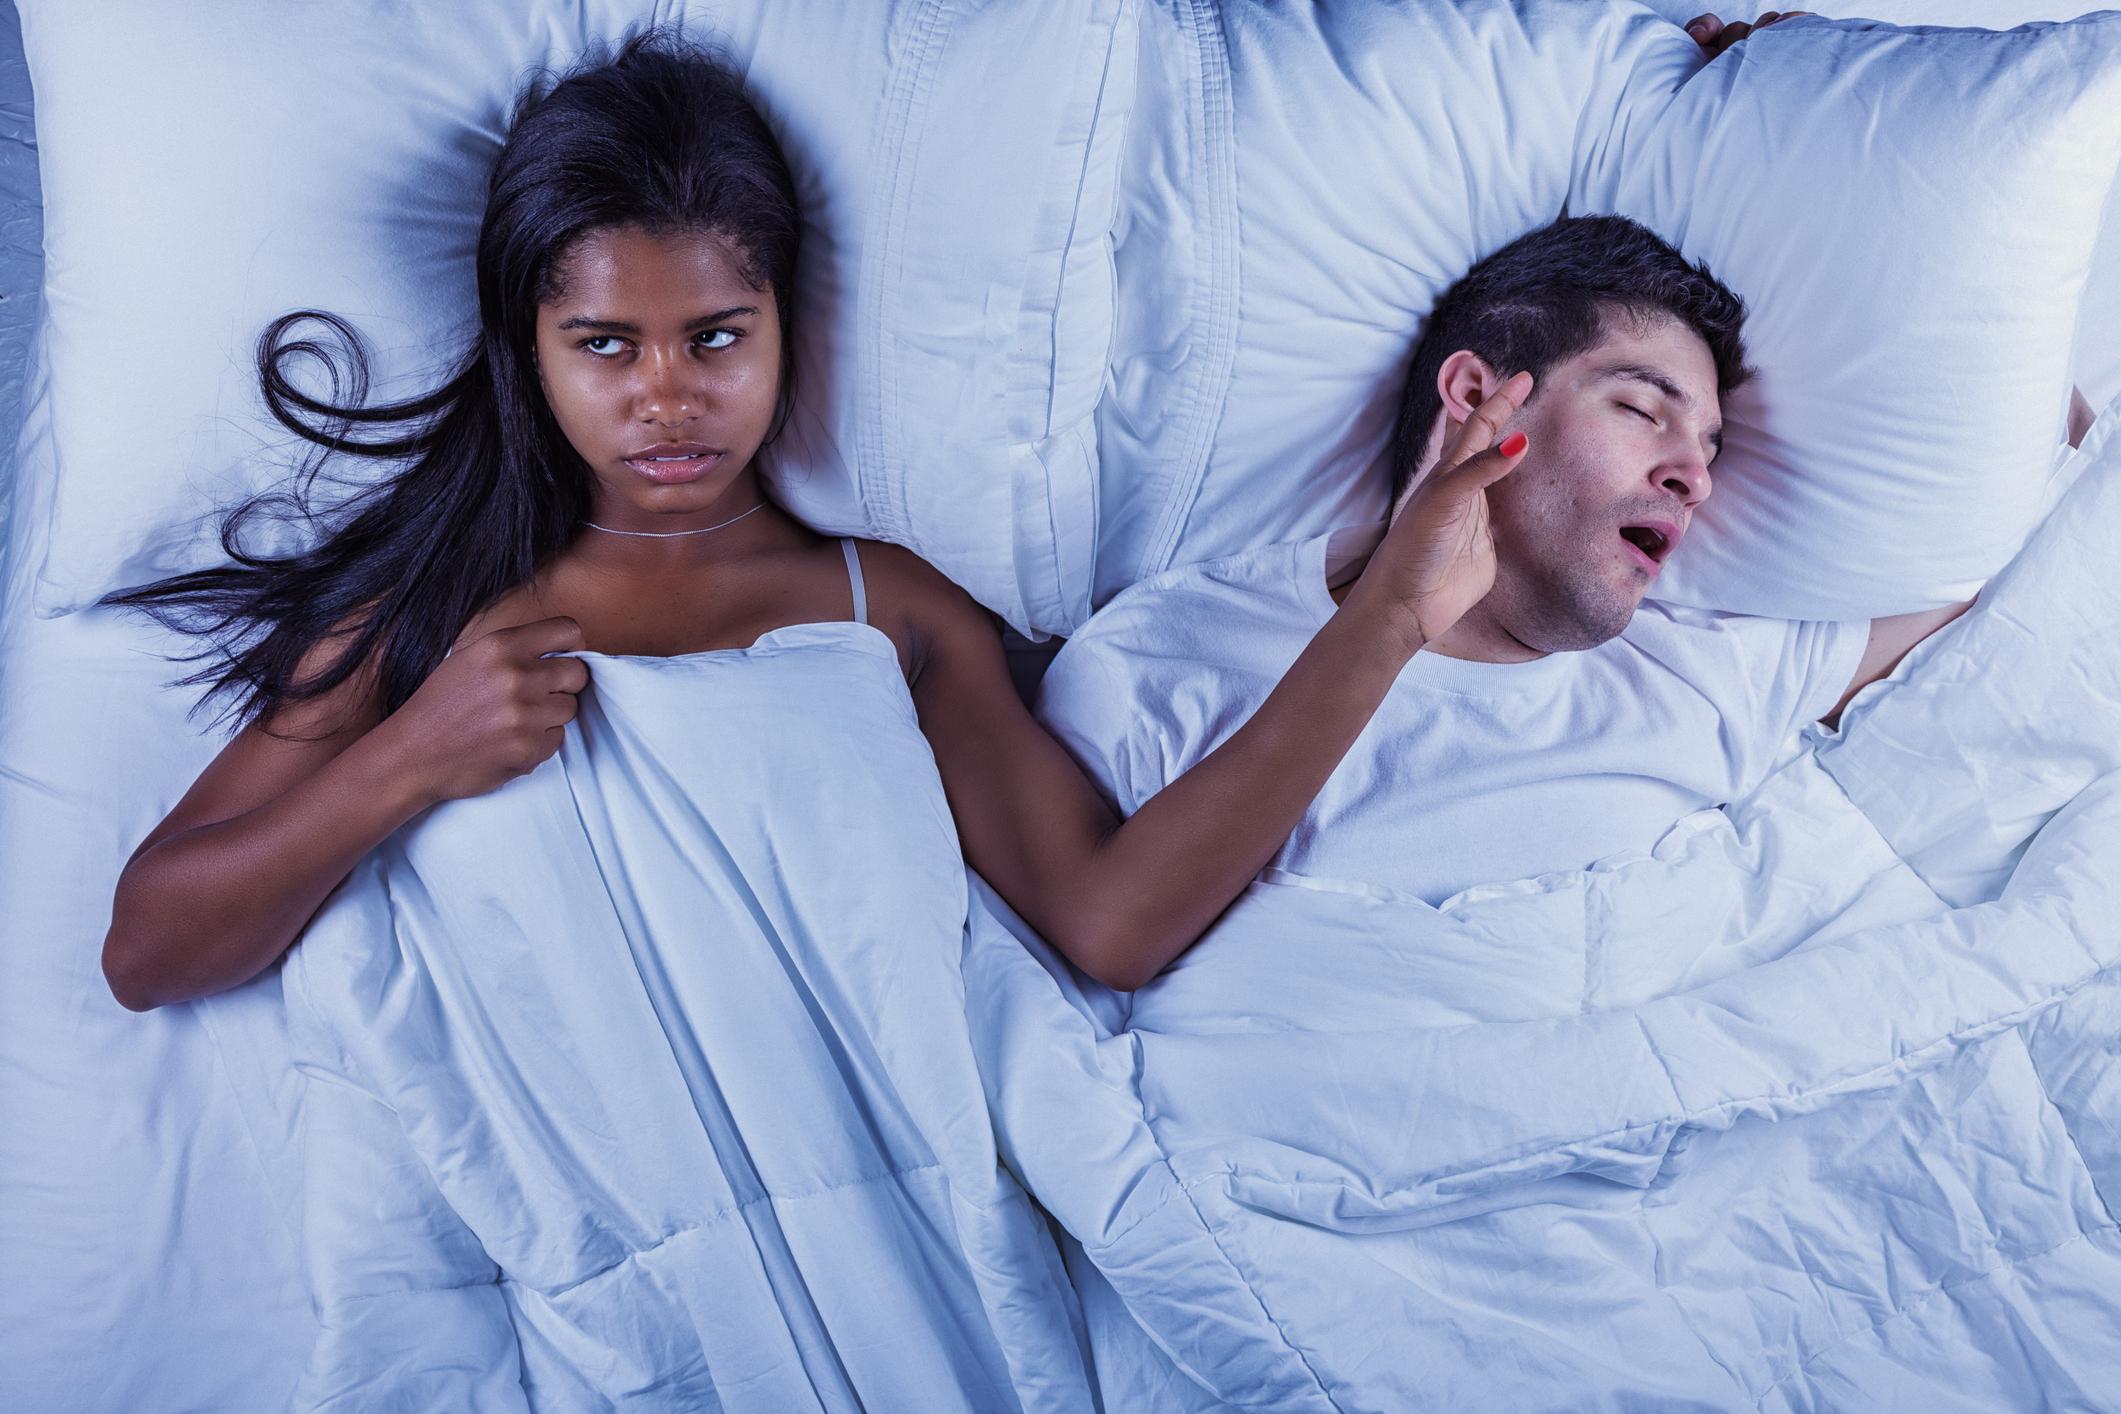 Women who snore have a harder time reaching orgasm, new study suggests The Independent